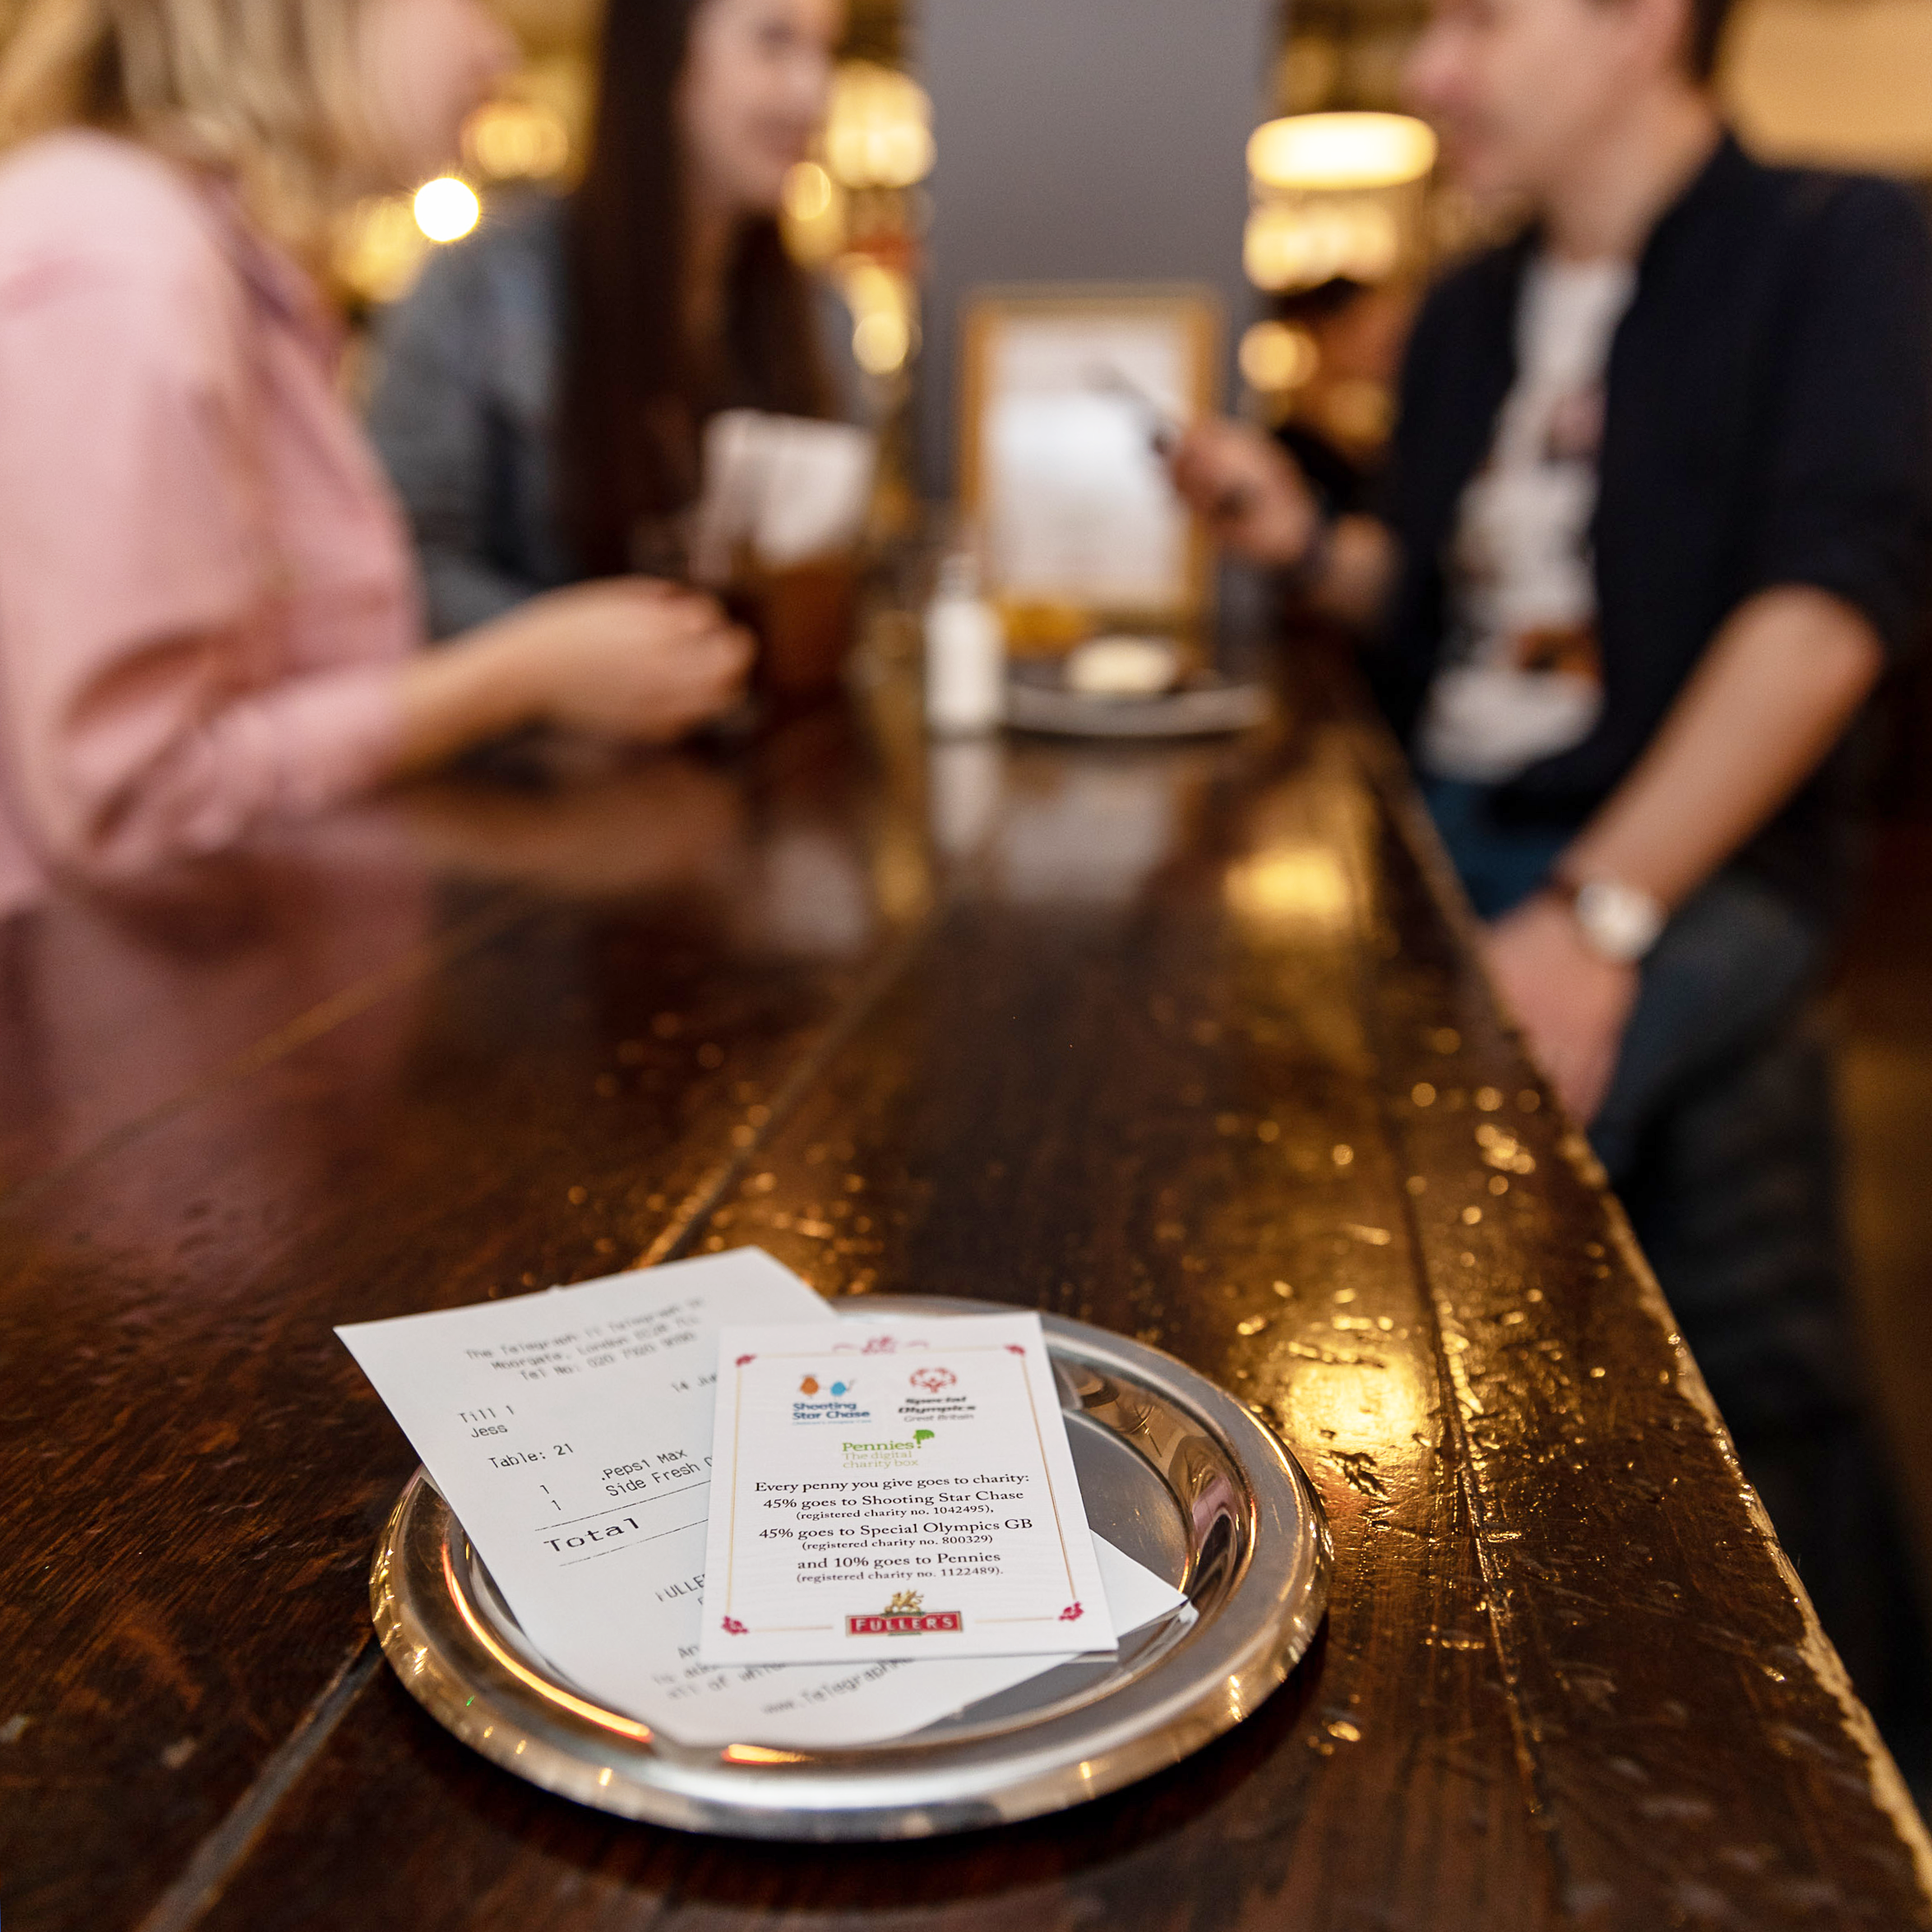 Customers in a Fuller's pub enjoy drinks, with details on the Pennies micro-donation opportunity presented to them with their bill